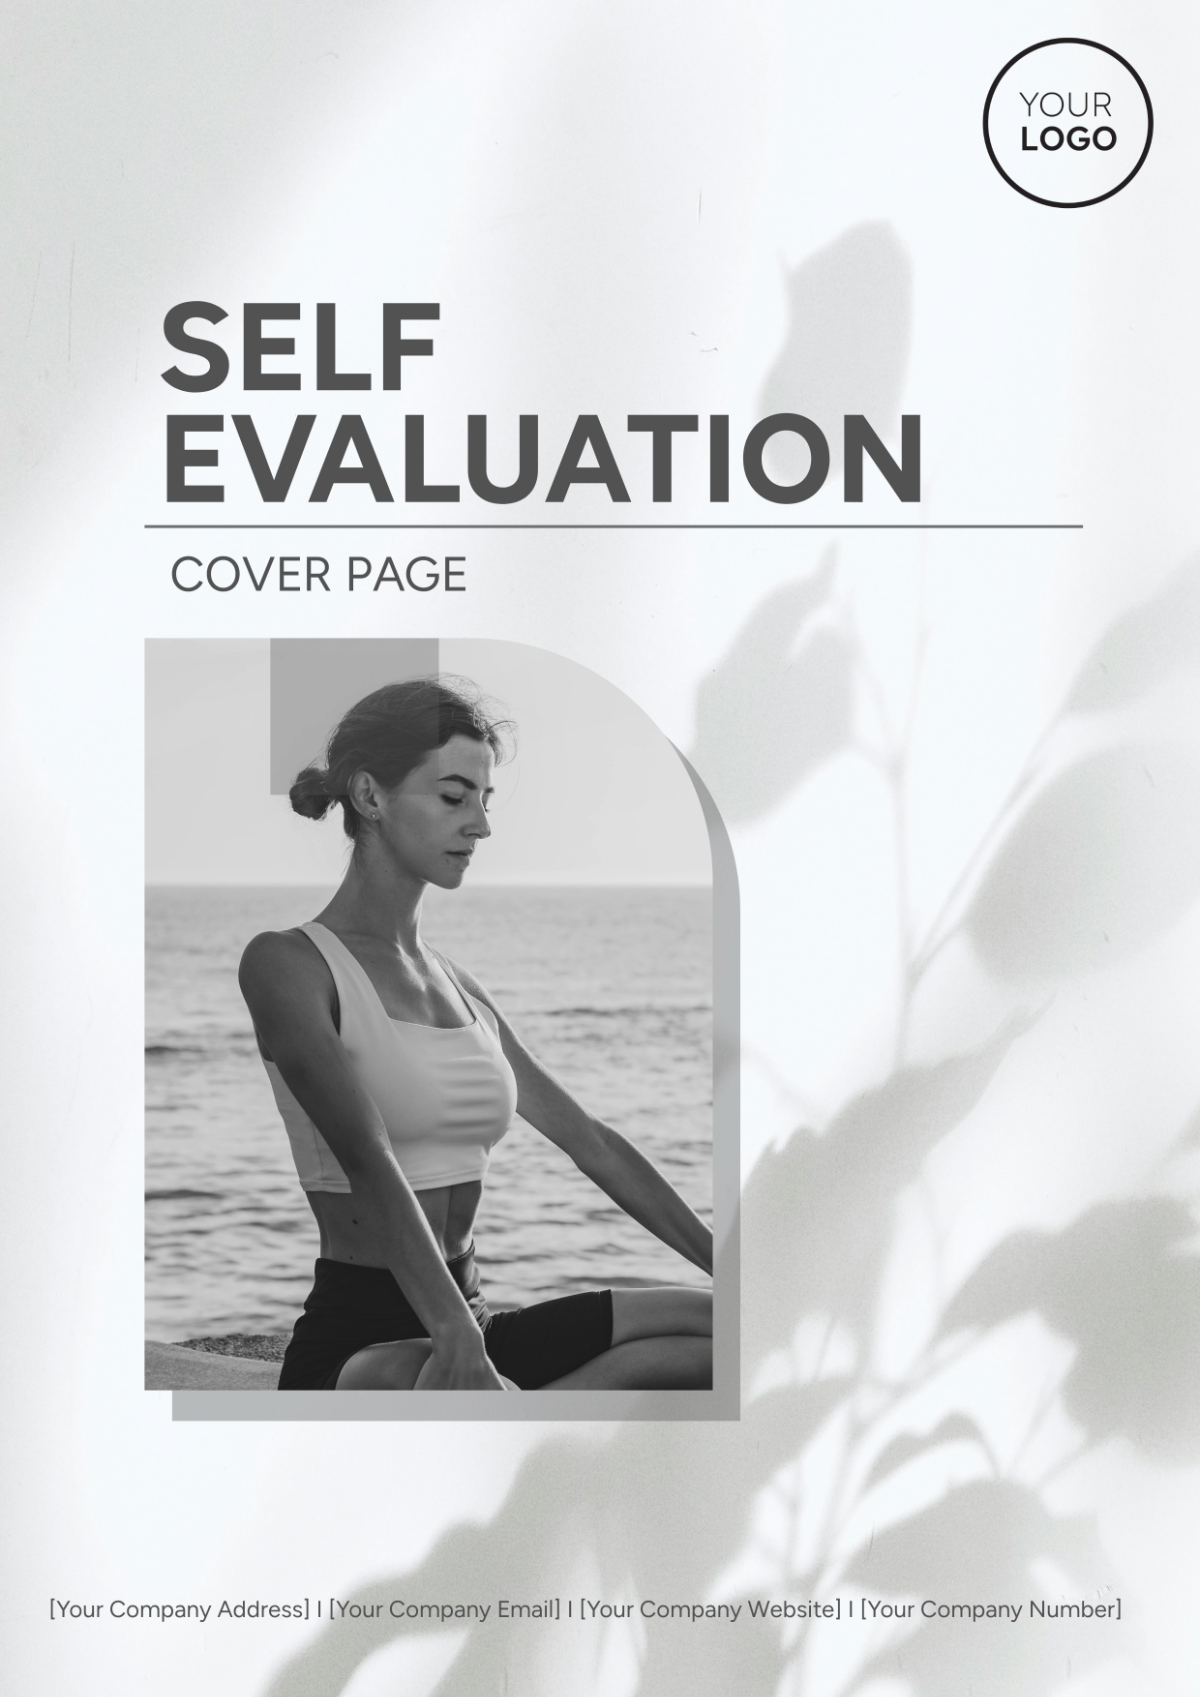 Self Evaluation Cover Page